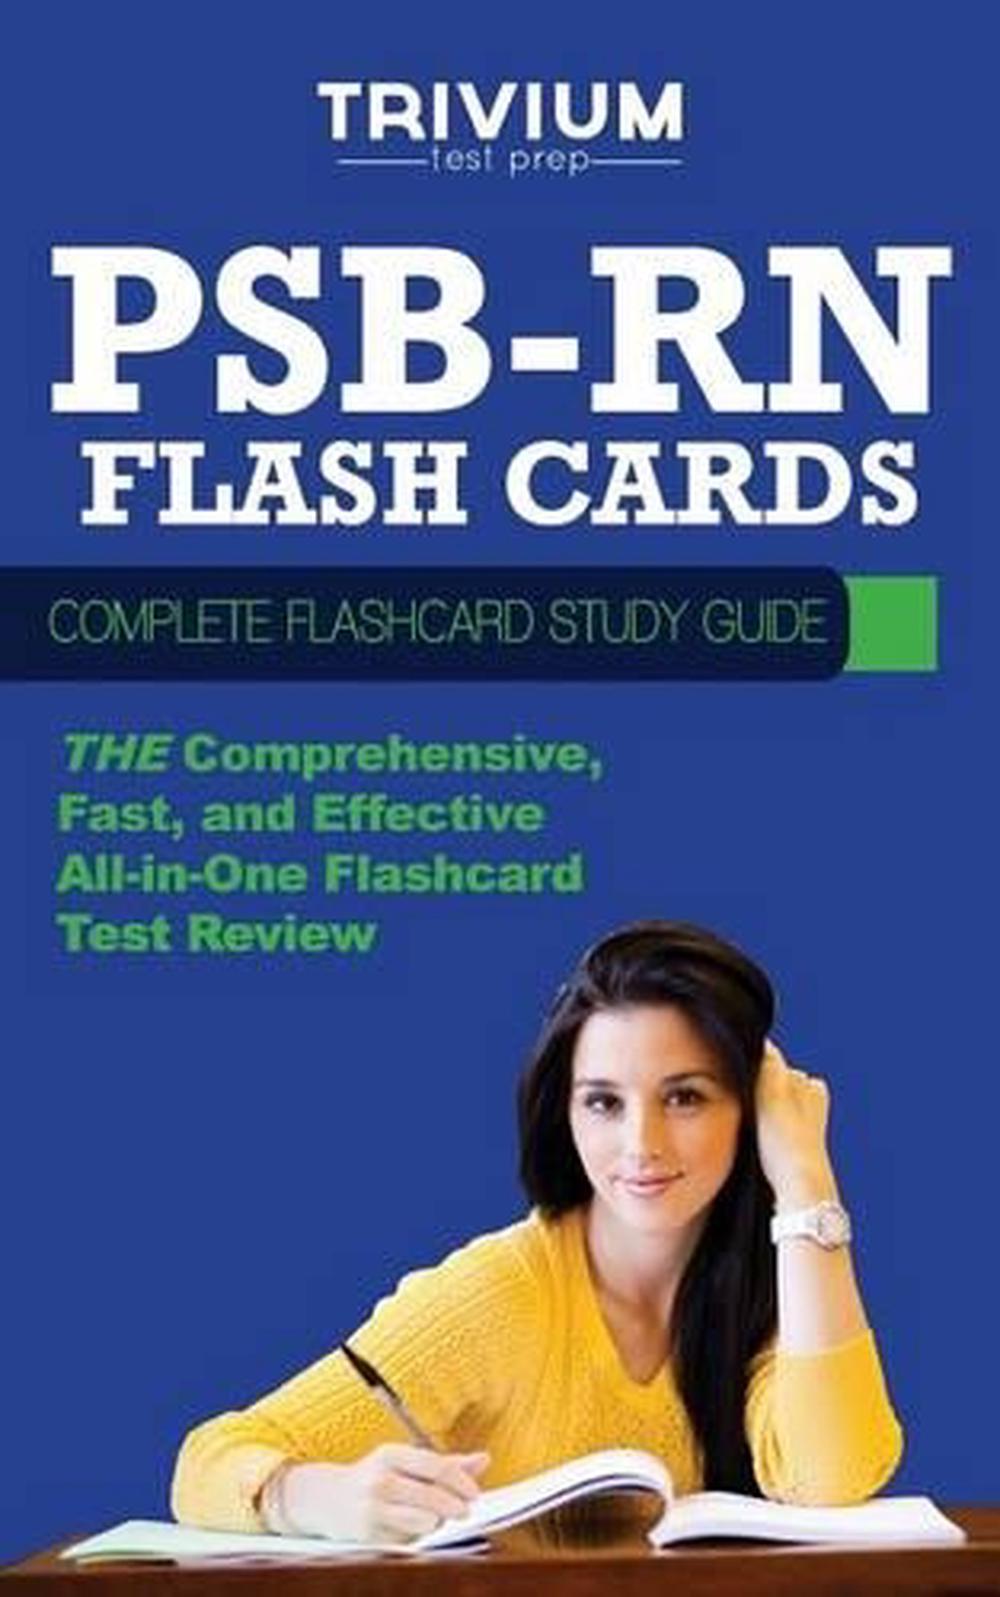 psb-rn-flash-cards-complete-flash-card-study-guide-by-trivium-test-prep-englis-9781940978260